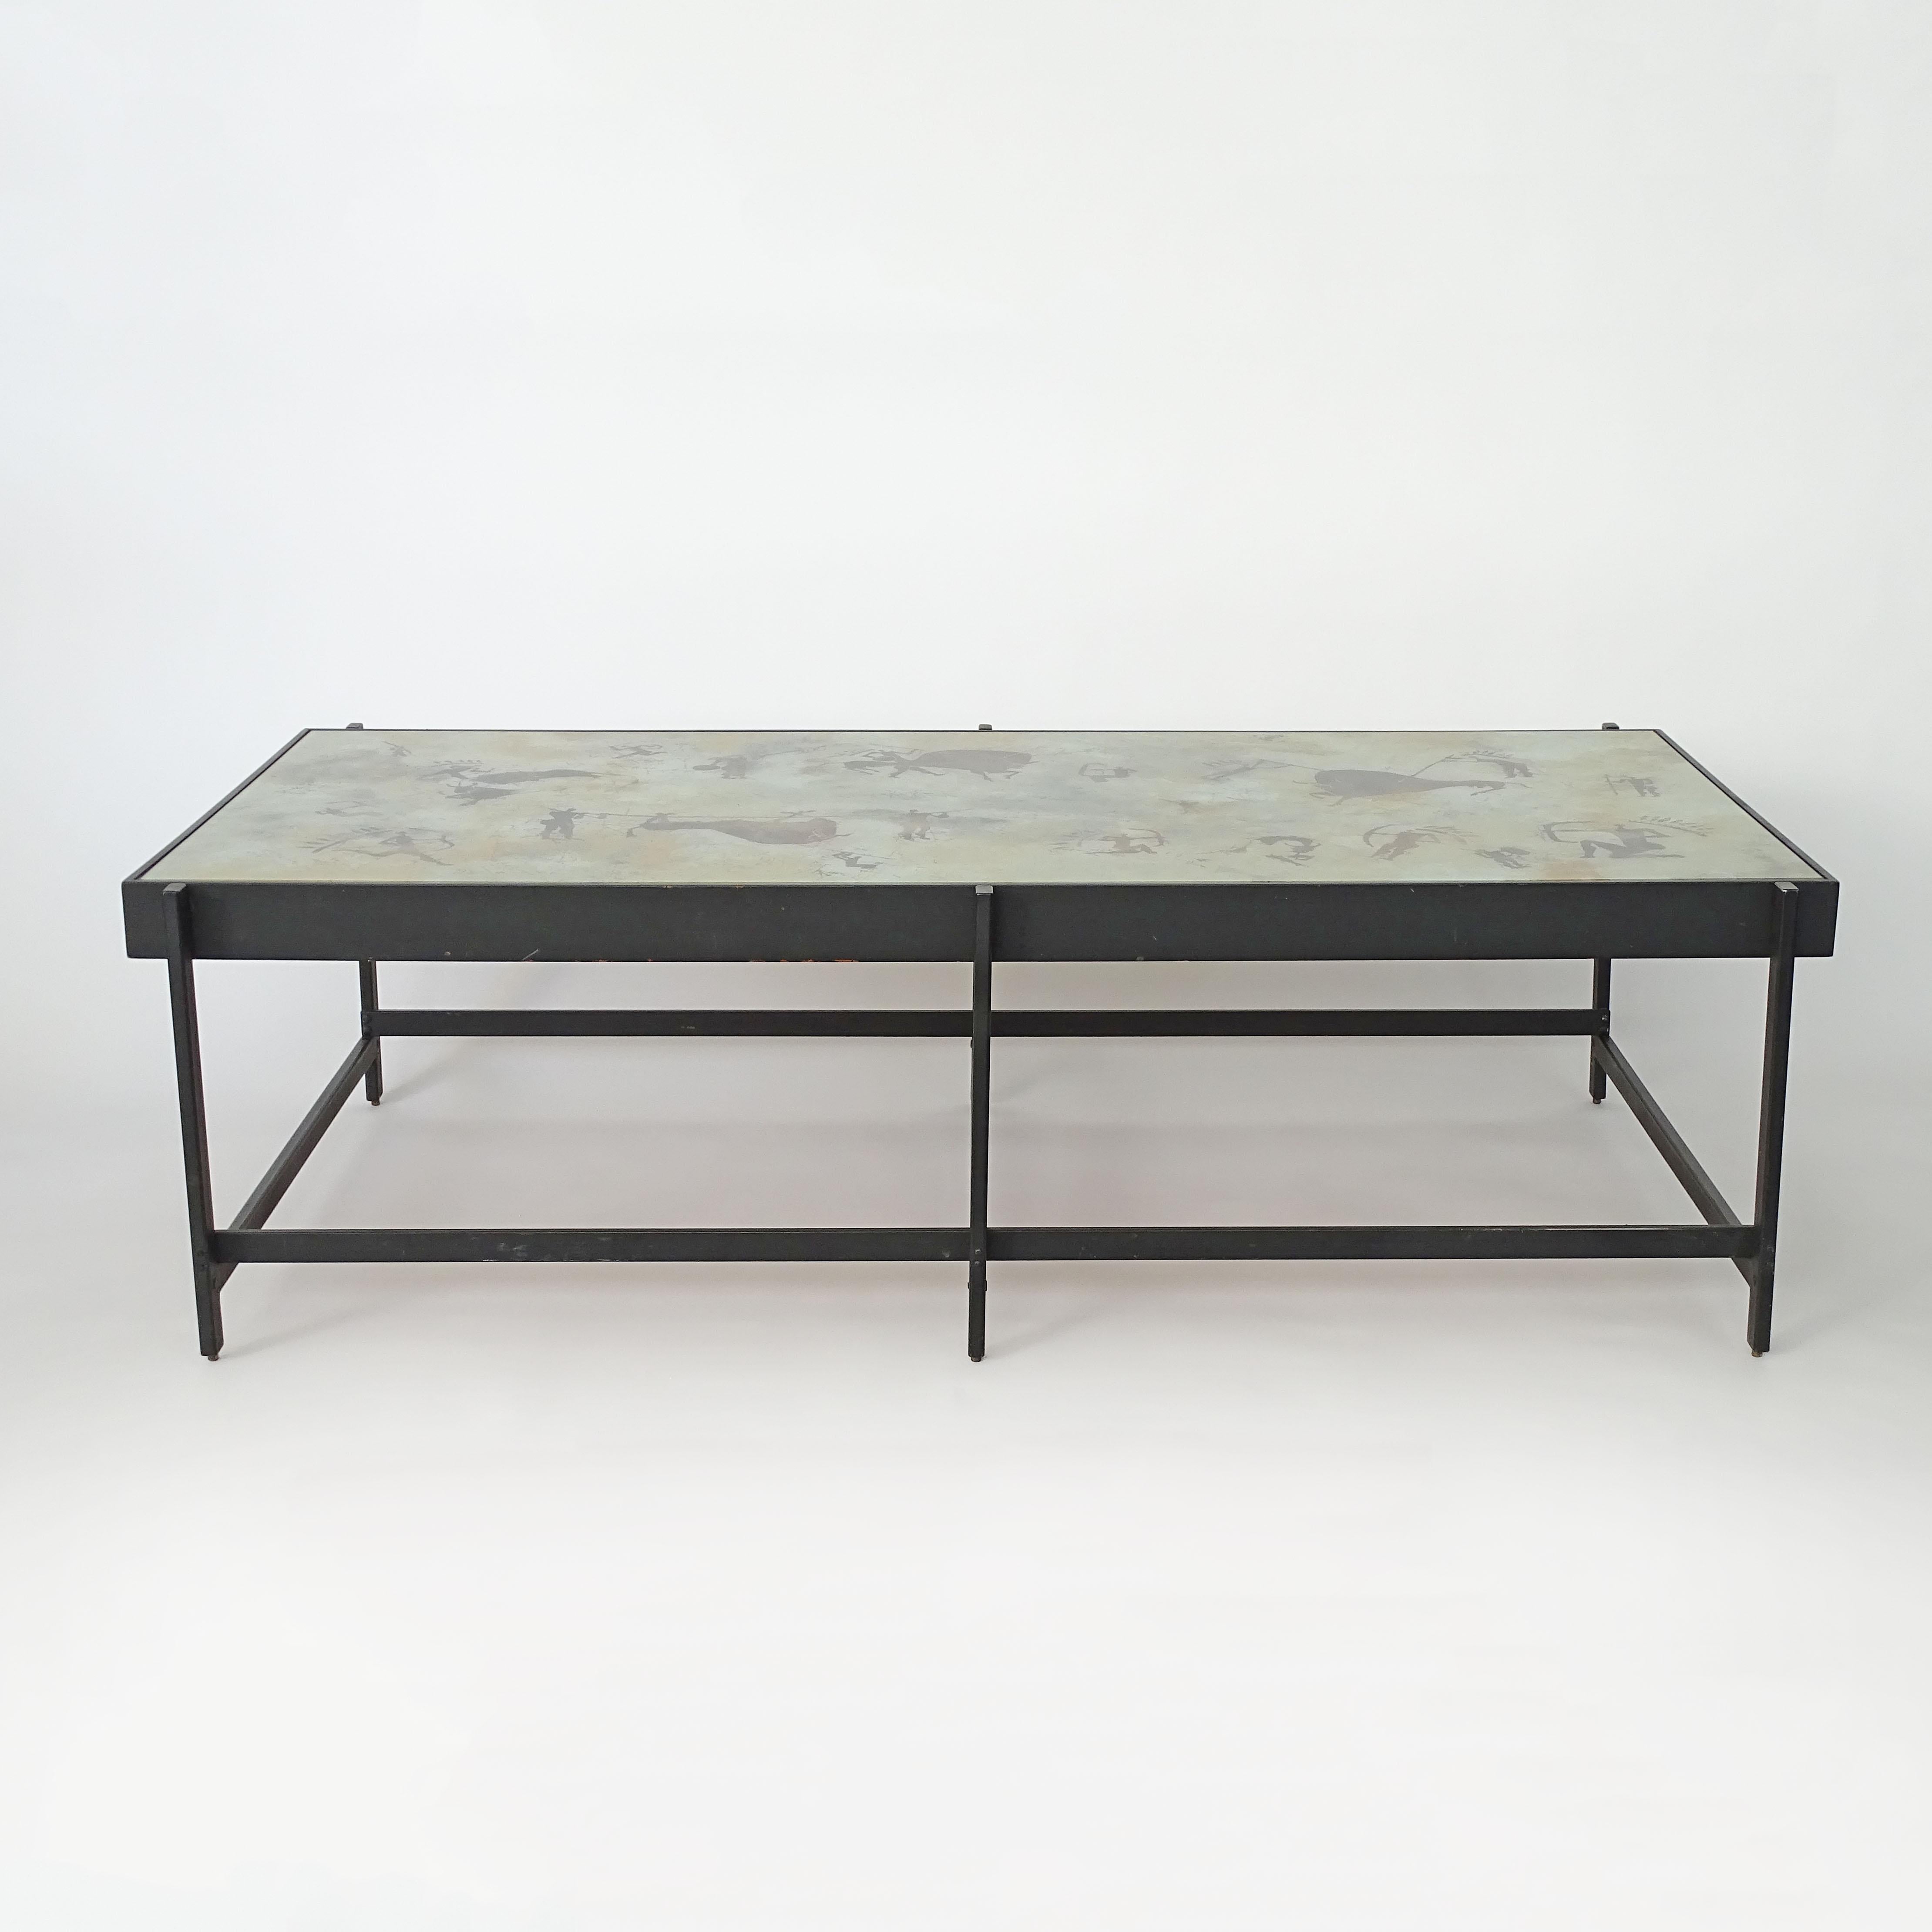 Unique and Monumental Coffee table attributed to Dubé for Fontana Arte.
The architectural metal structure holds a black painted wooden frame with a cased Duilio Dubé Bernabe Cave Drawings reverse painted glass.


